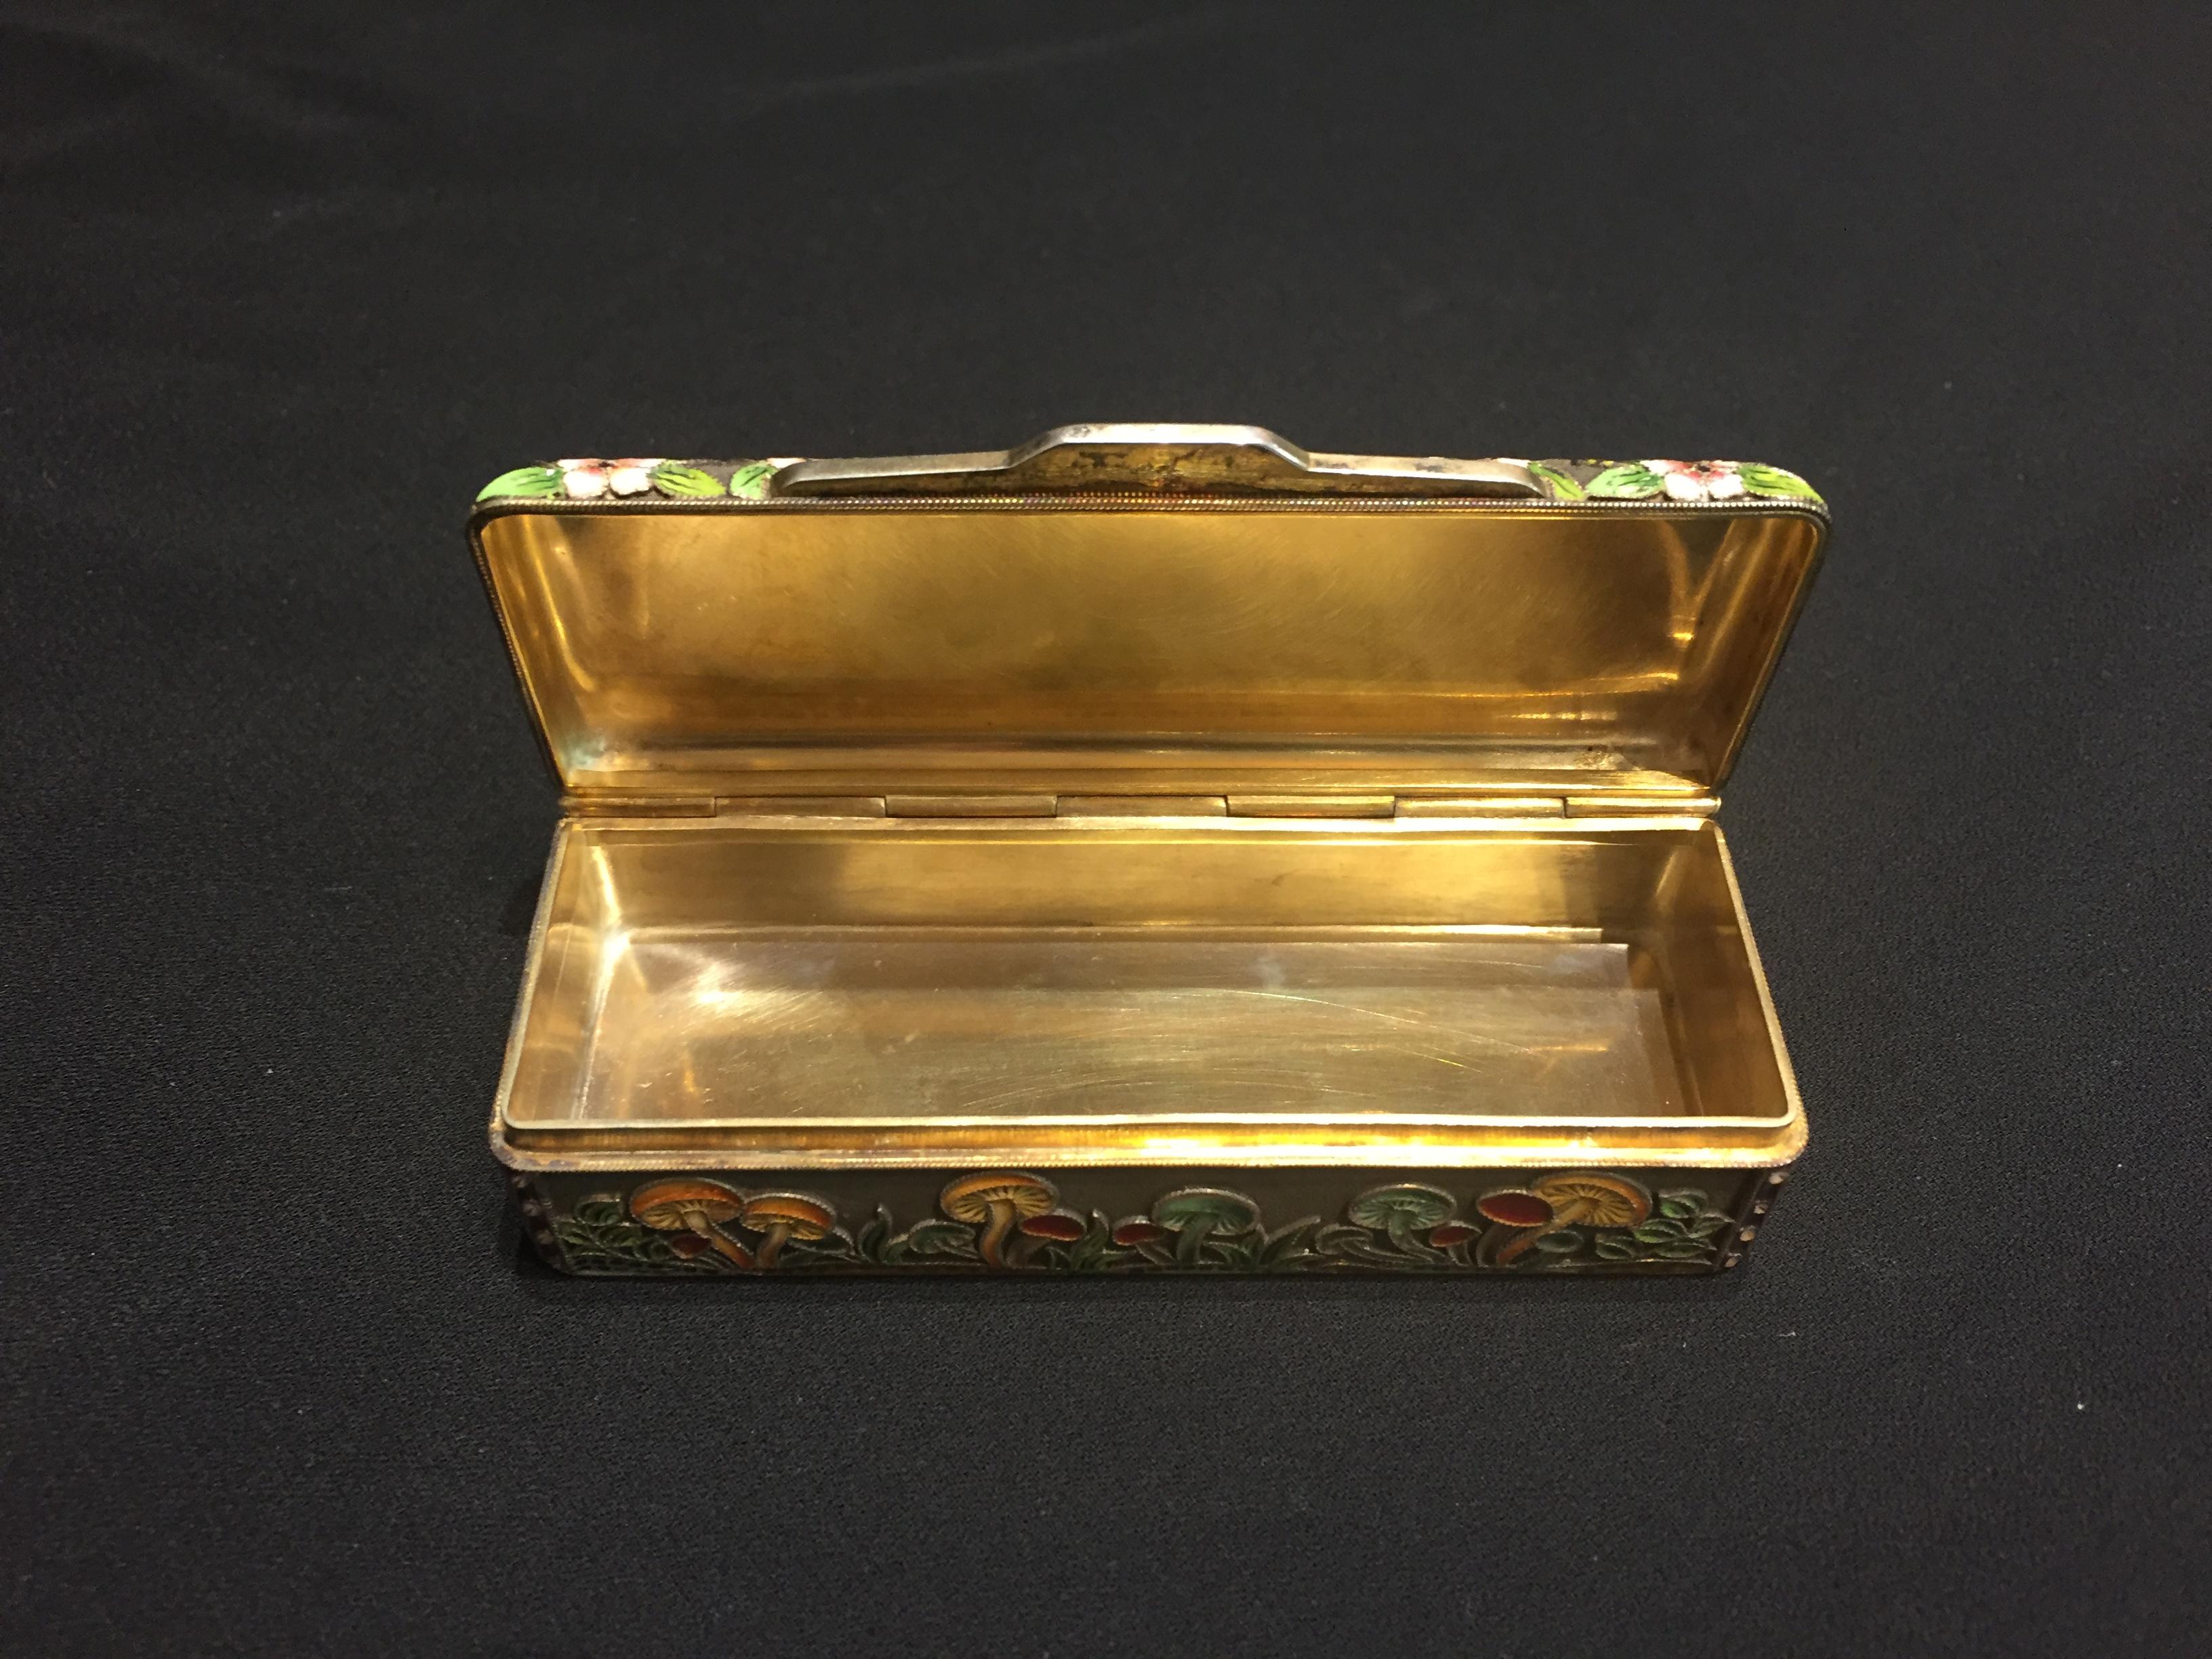 Rare and unique, this sterling silver, enamel and gilt snuffbox, decorated with mushrooms was commissioned in a single copy by the known New York City art collector, antiquarian and gallerist, Mikhail Krikheli.

Hallmarked with “STERLING” and two